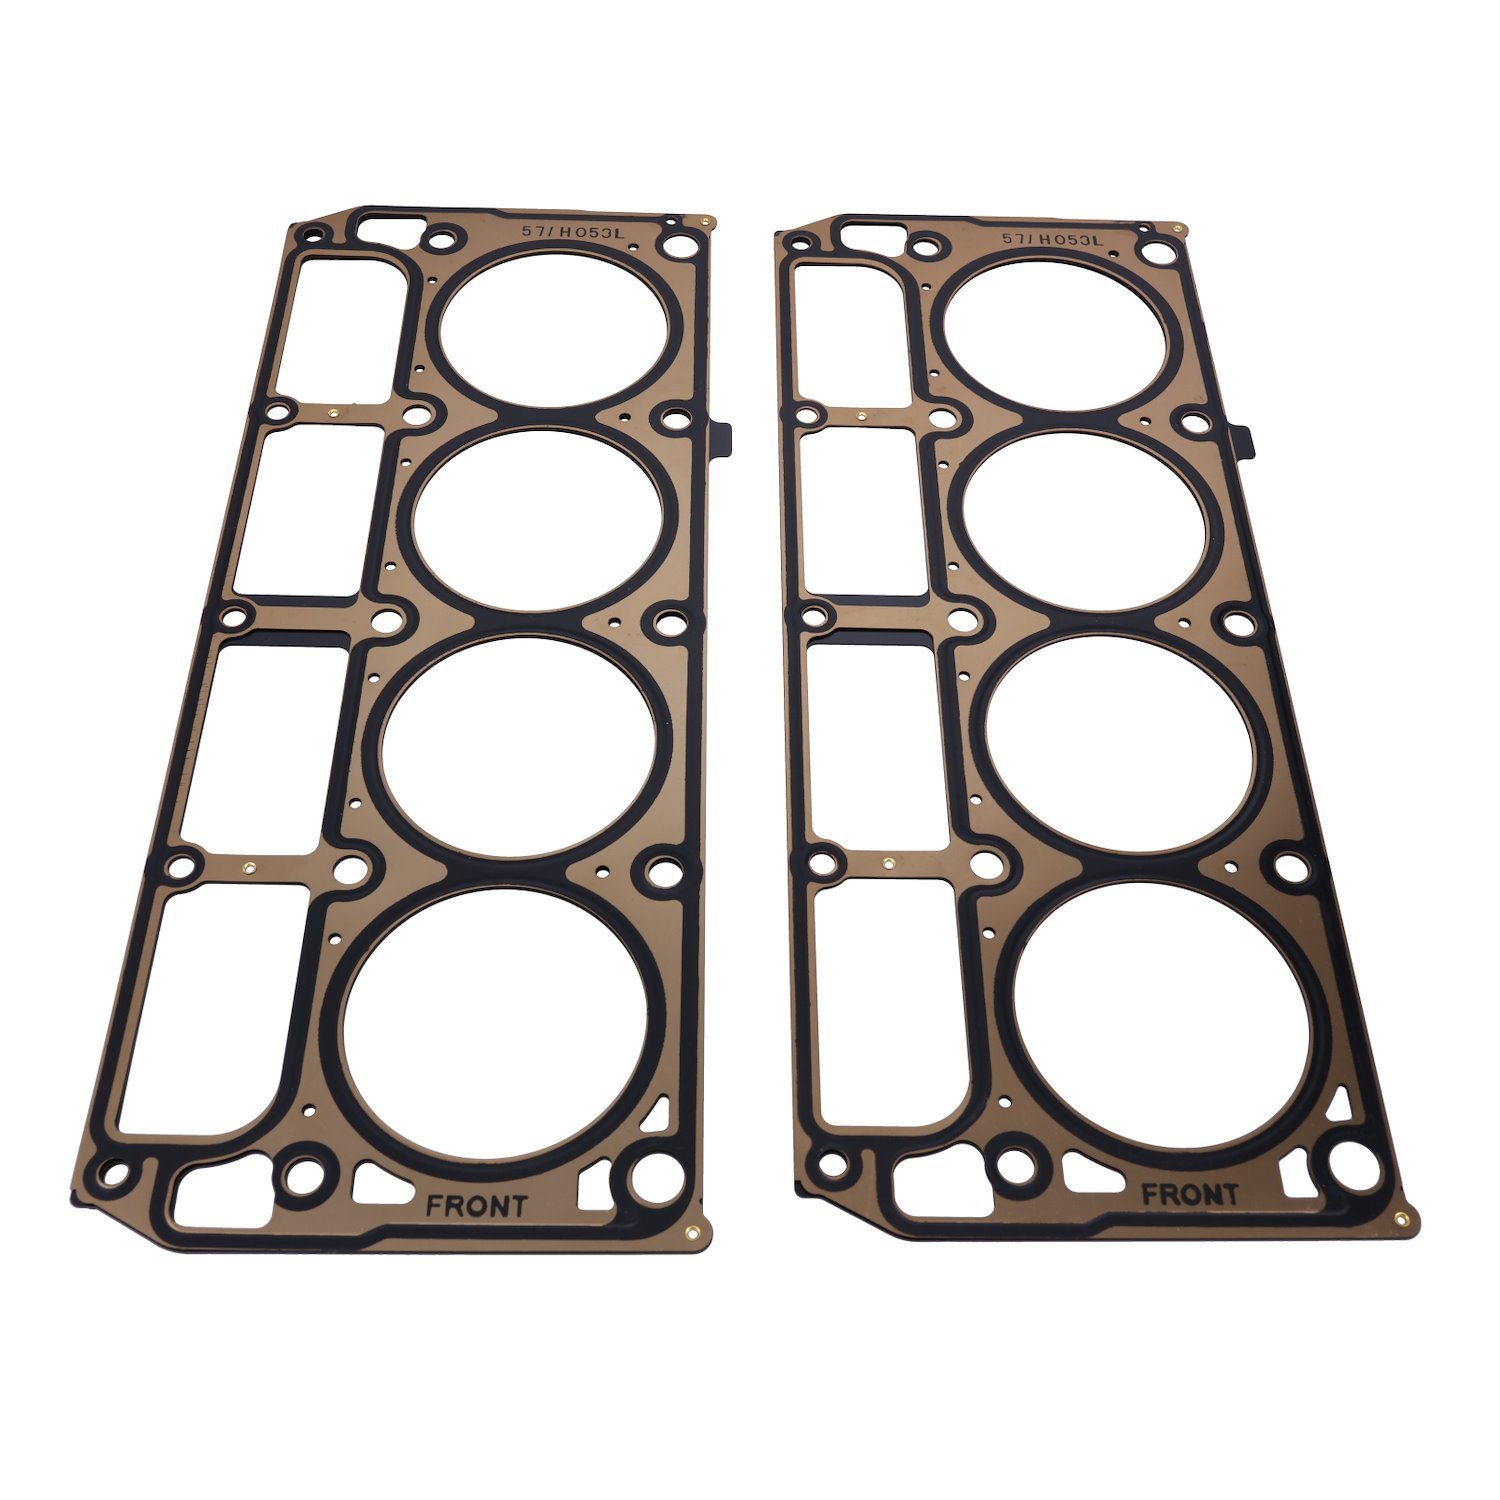 GK008 LS1, LS6 Cylinder Head Gaskets, Steel and Rubber